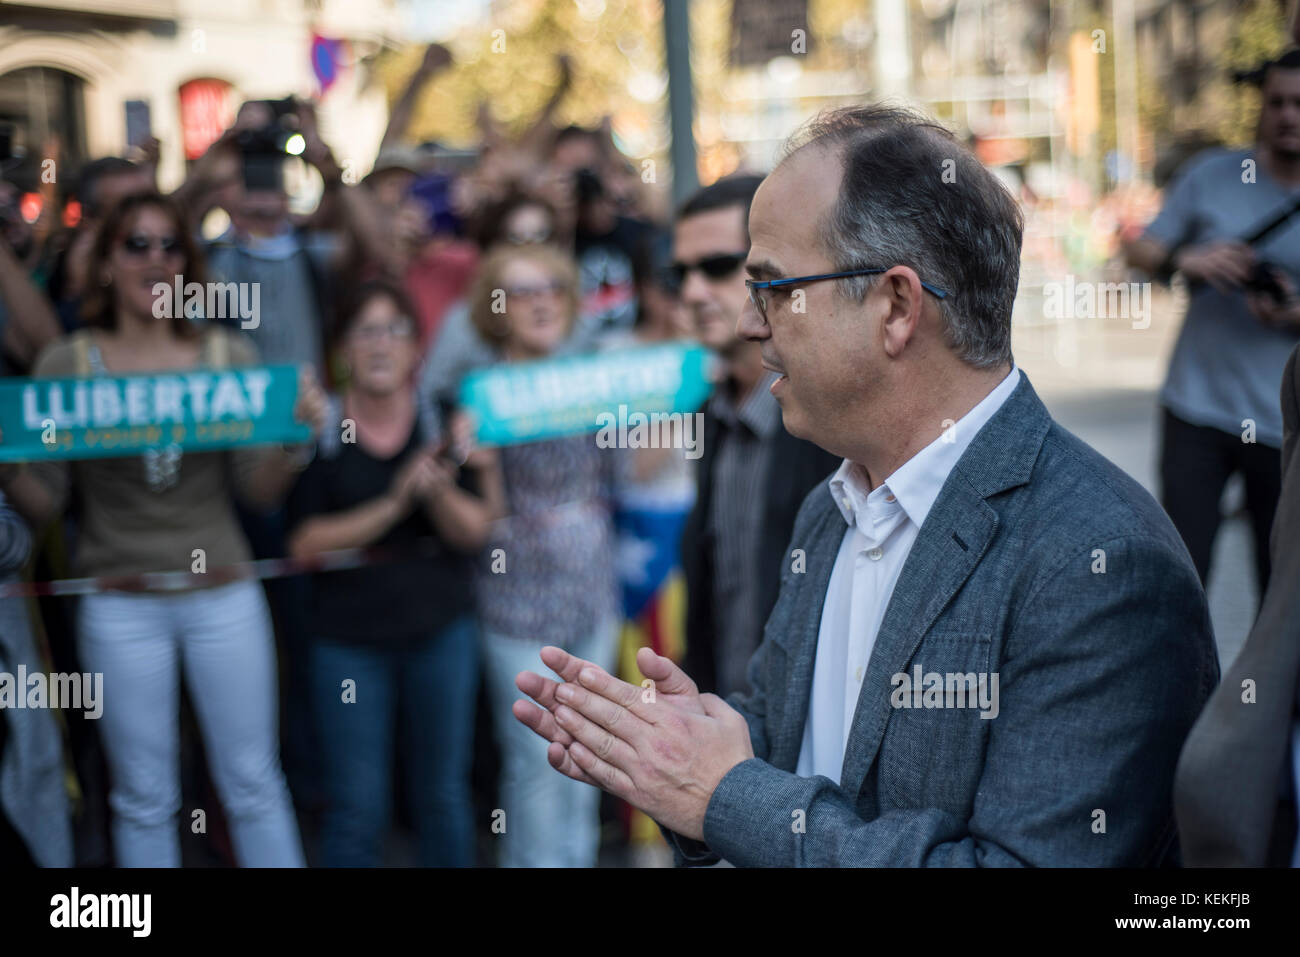 Barcelona, Spain. 21st October, 2017. Barcelona. Jordi Turull, adviser of the Presidency and Spokesman of the Government of the Generalitat of Catalonia arrrives to the demonstration against the imprisonment of the Catalan leaders Jordi Sánchez (ANC) and Jordi Cuixart (Òmnium Cultural) and the intervention of the Spanish State in the Government of Catalonia through Article 155 of the Constitution, never used before. All the main members of the Catalan government have attended the demonstration. Credit: Alamy / Carles Desfilis Stock Photo